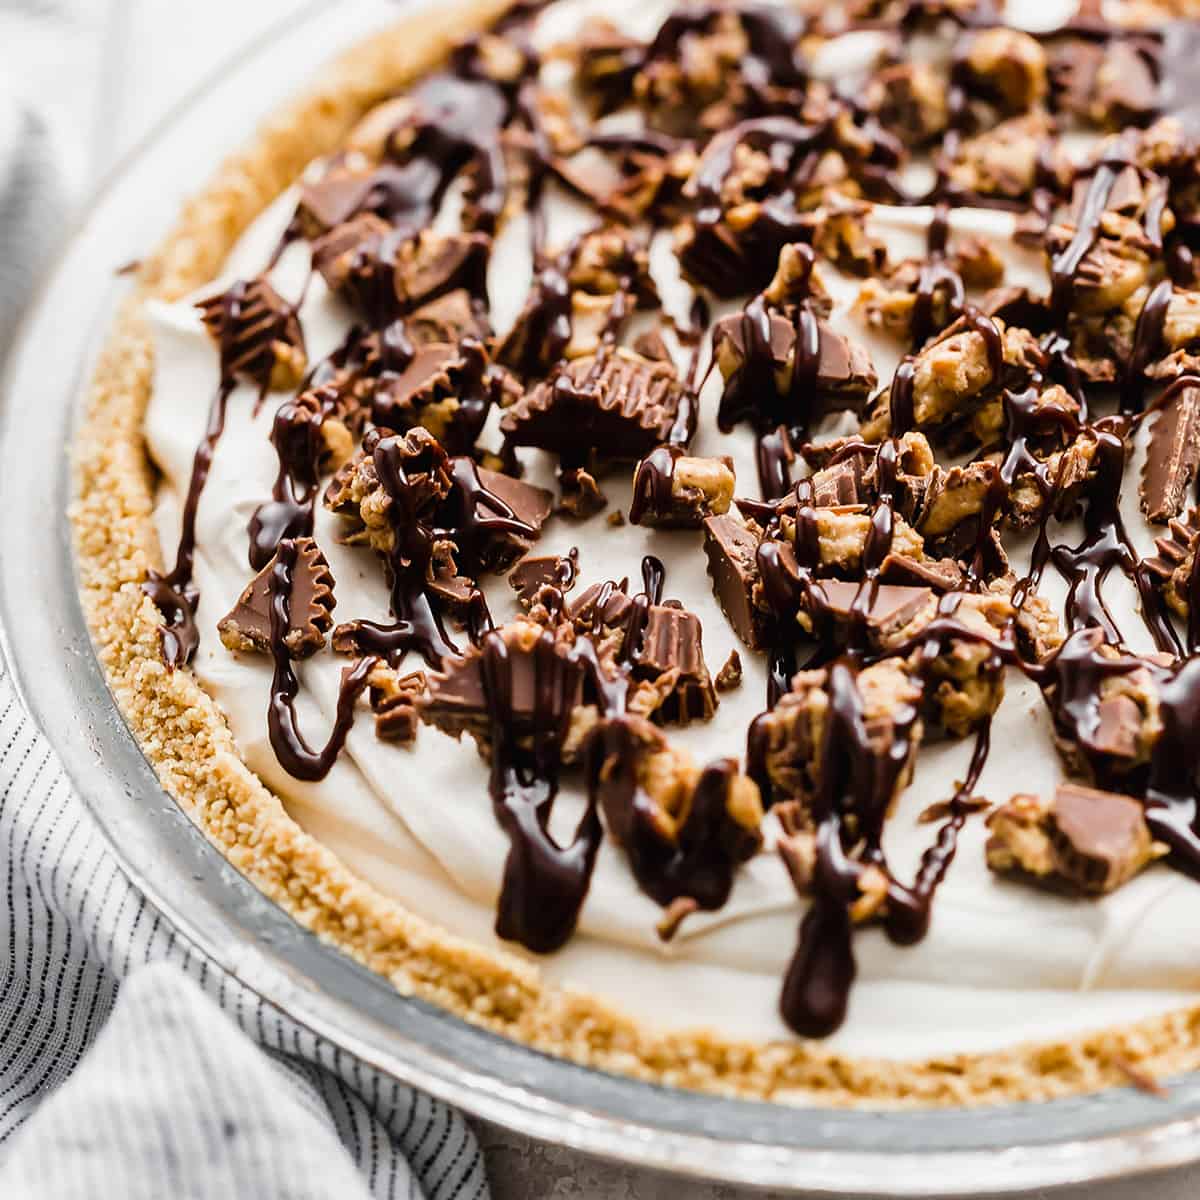 A No-Bake Peanut Butter Pie topped with hot fudge and chopped peanut butter cups.